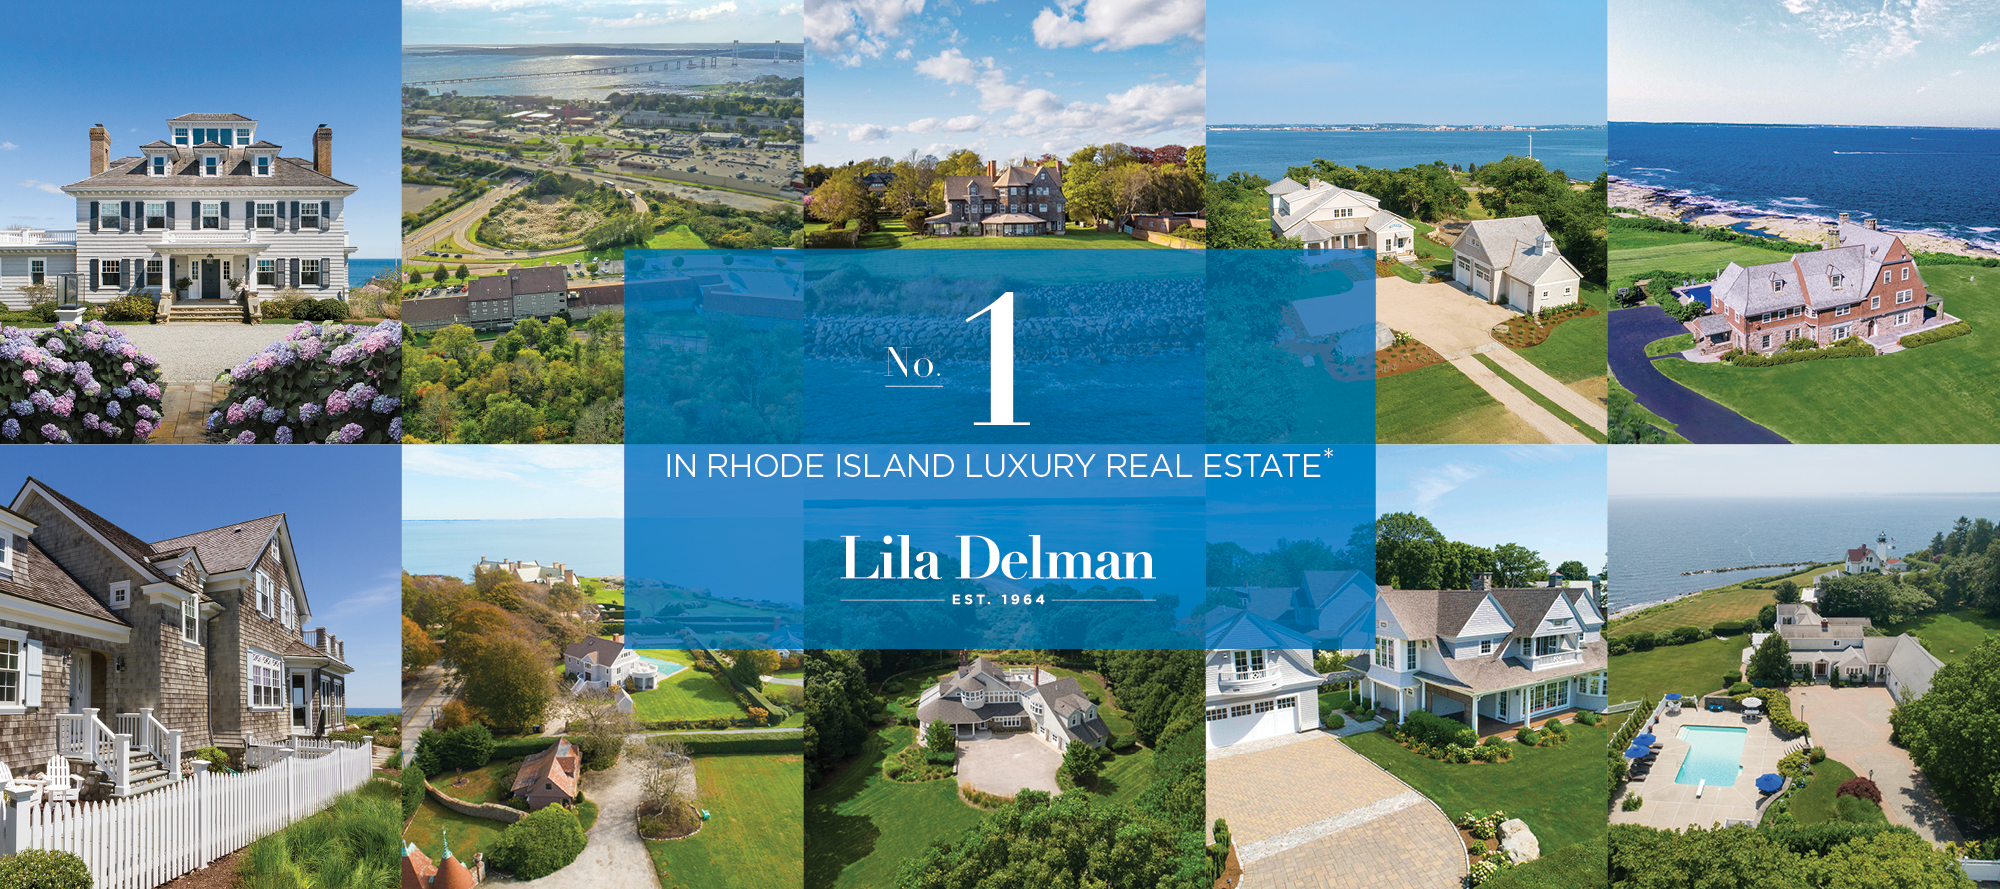 LILA DELMAN REAL ESTATE CELEBRATES A RECORD BREAKING 2019, HAVING CLOSED OVER $560M IN SALES VOLUME AND MAINTAINED LEADERSHIP IN THE LUXURY MARKET